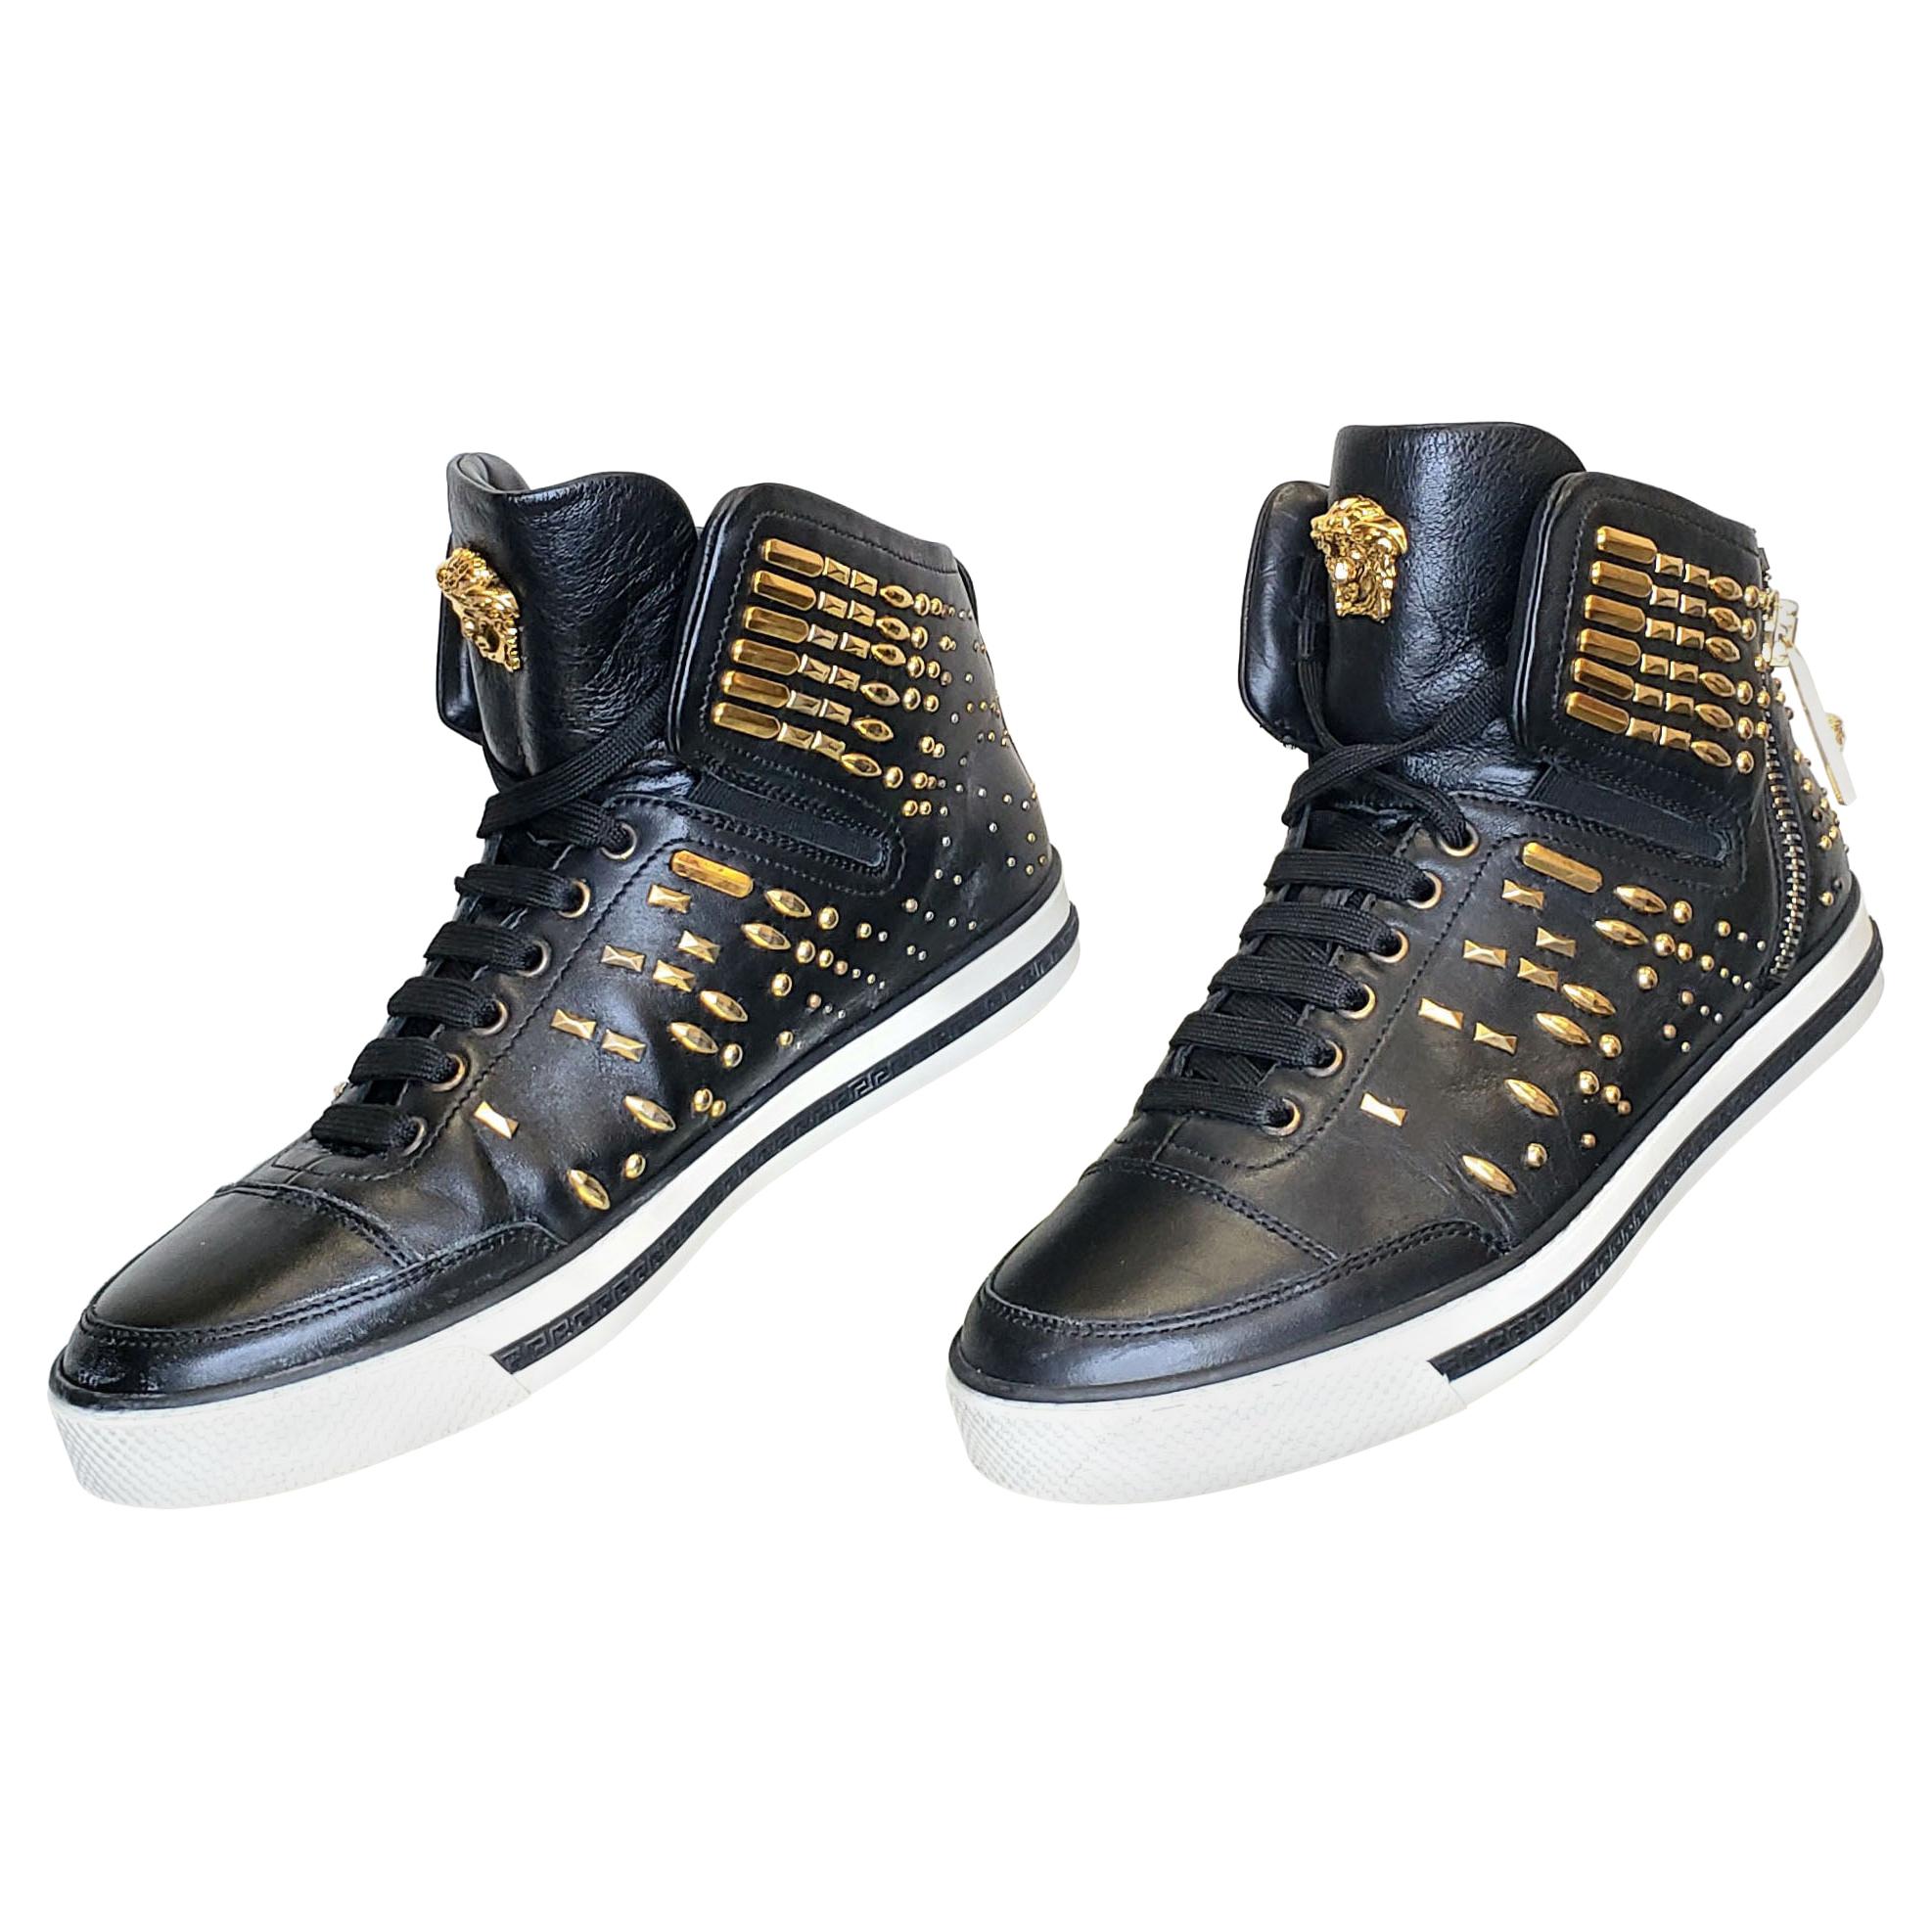 VERSACE STUDDED HIGH-TOP SNEAKERS with GOLD MEDUSA side ZIPPER at 1stDibs |  versace high tops, versace hi top, high top versace sneakers